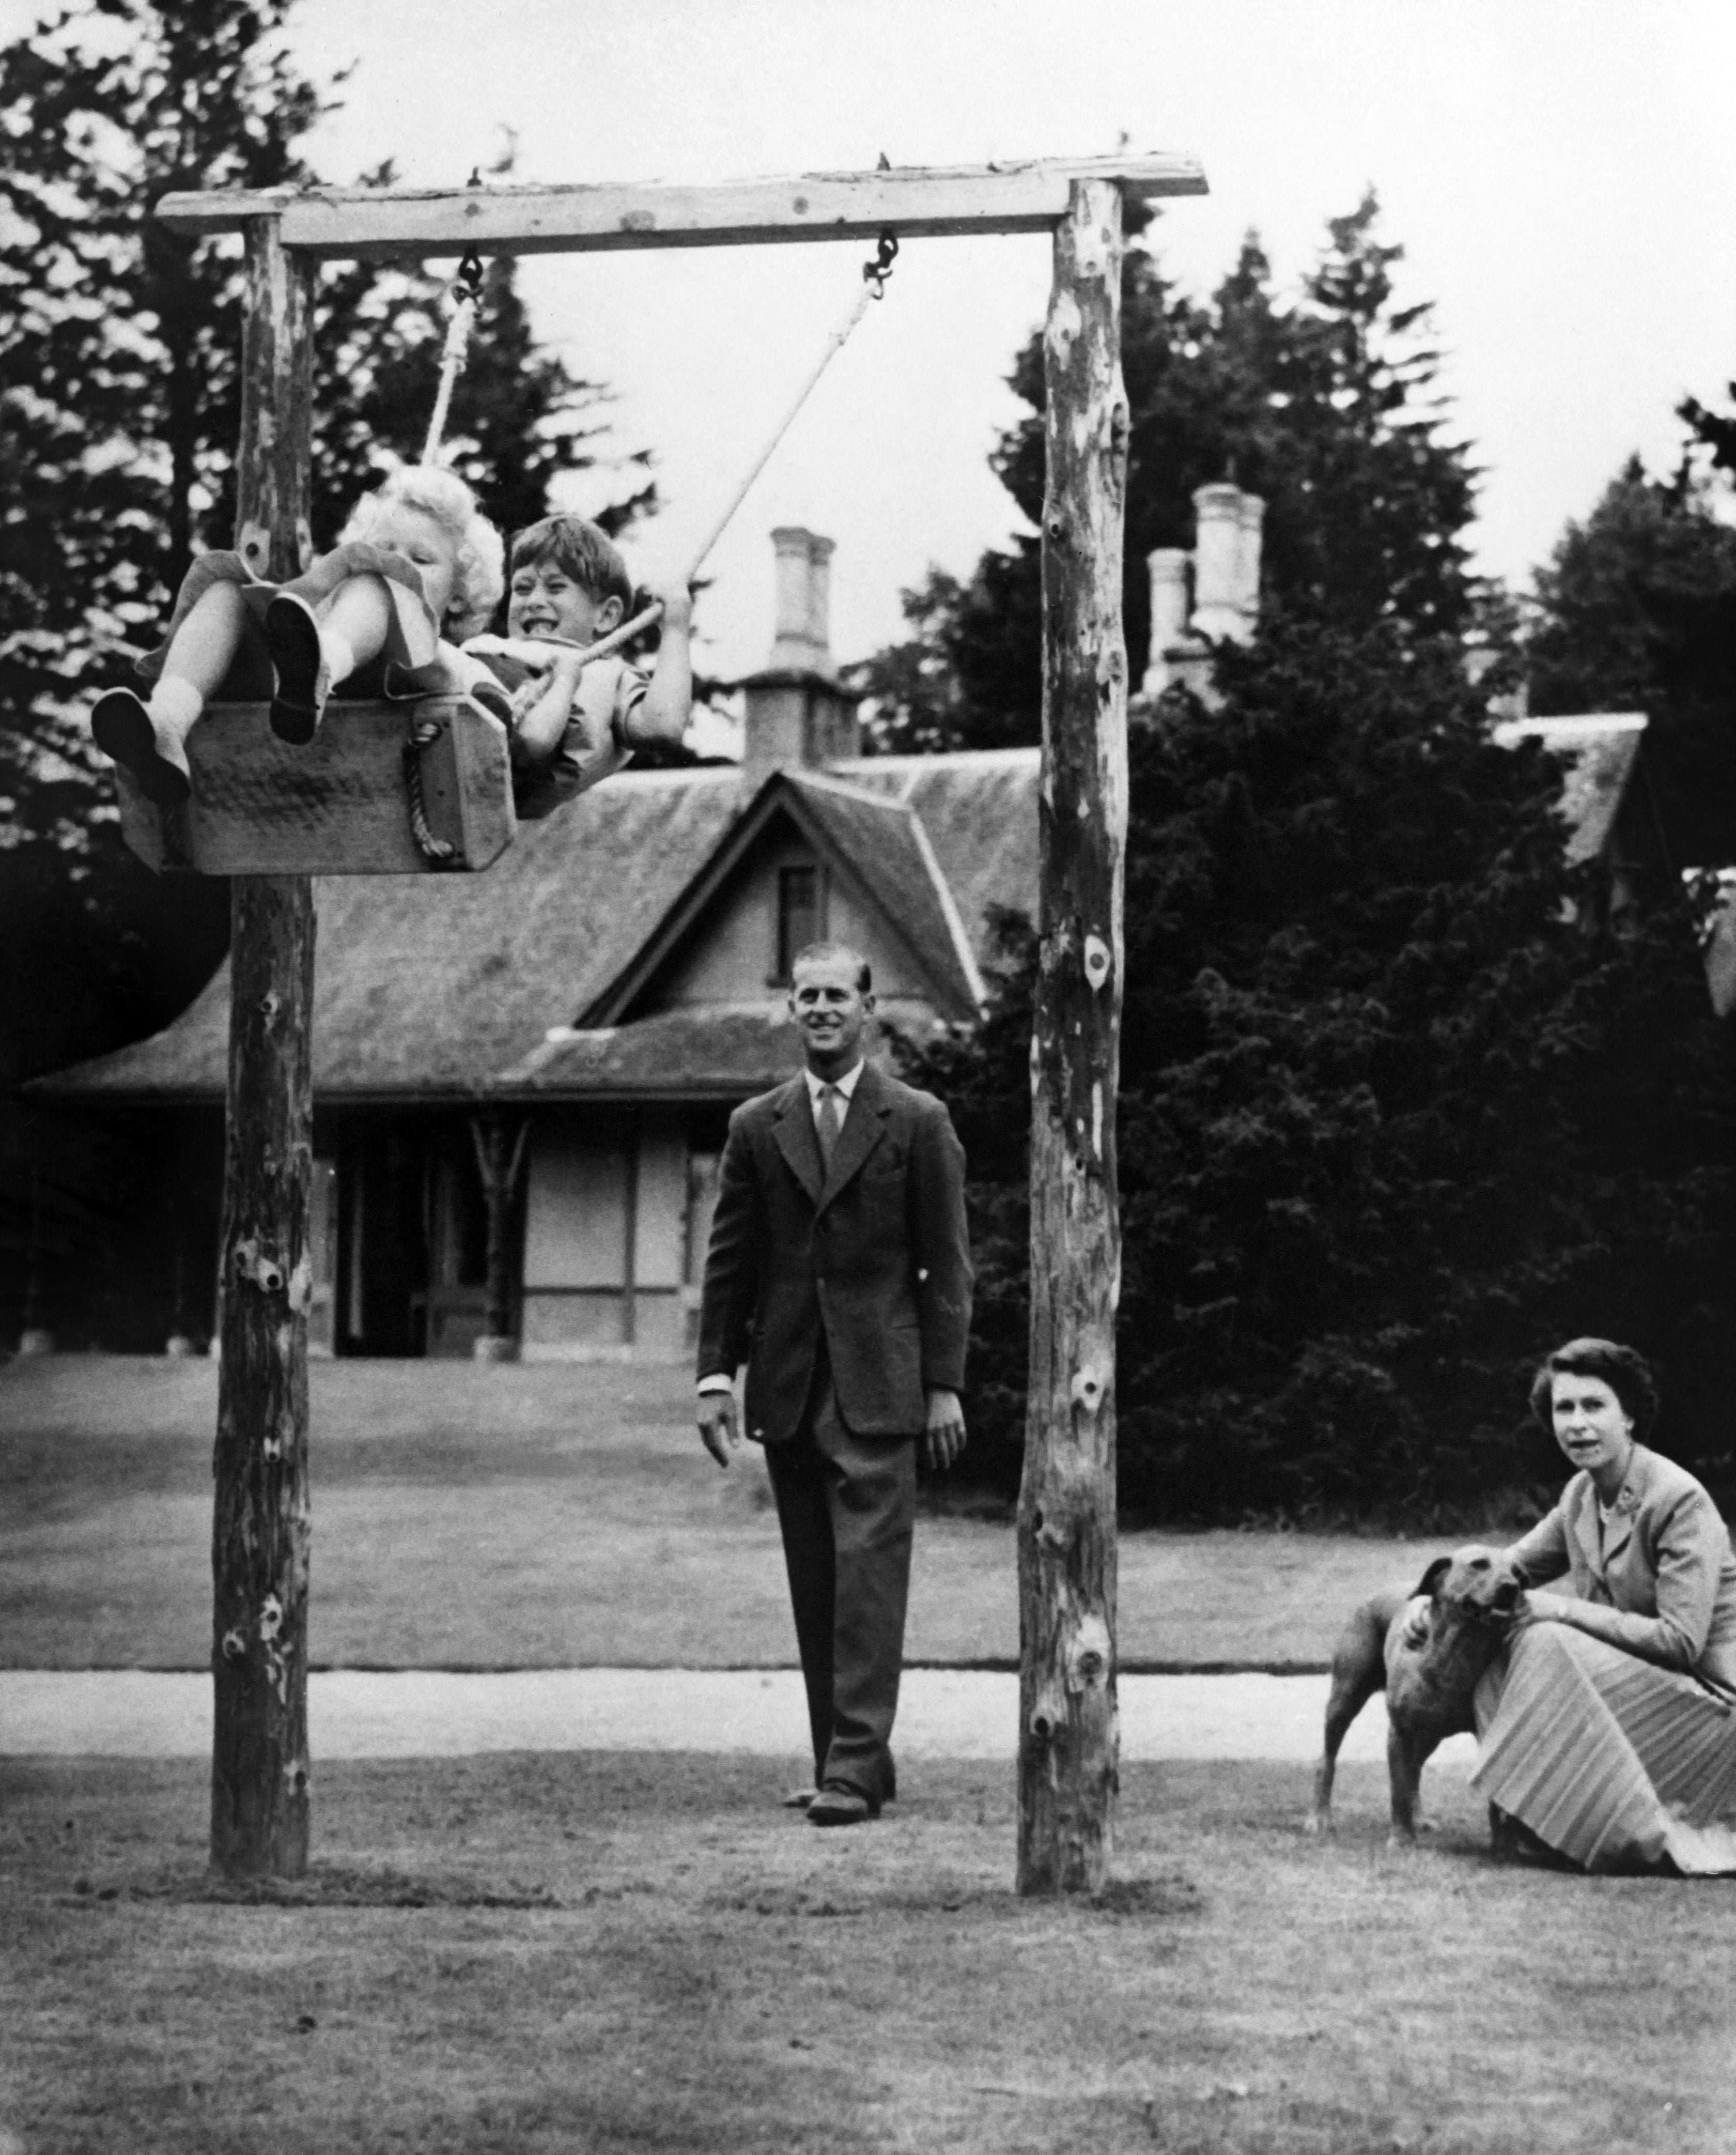 Britain's Queen Elizabeth II (right) and Prince Philip, Duke of Edinburgh (centre) play with Prince Charles and Princess Anne at Balmoral Castle in Aberdeenshire in September 1955